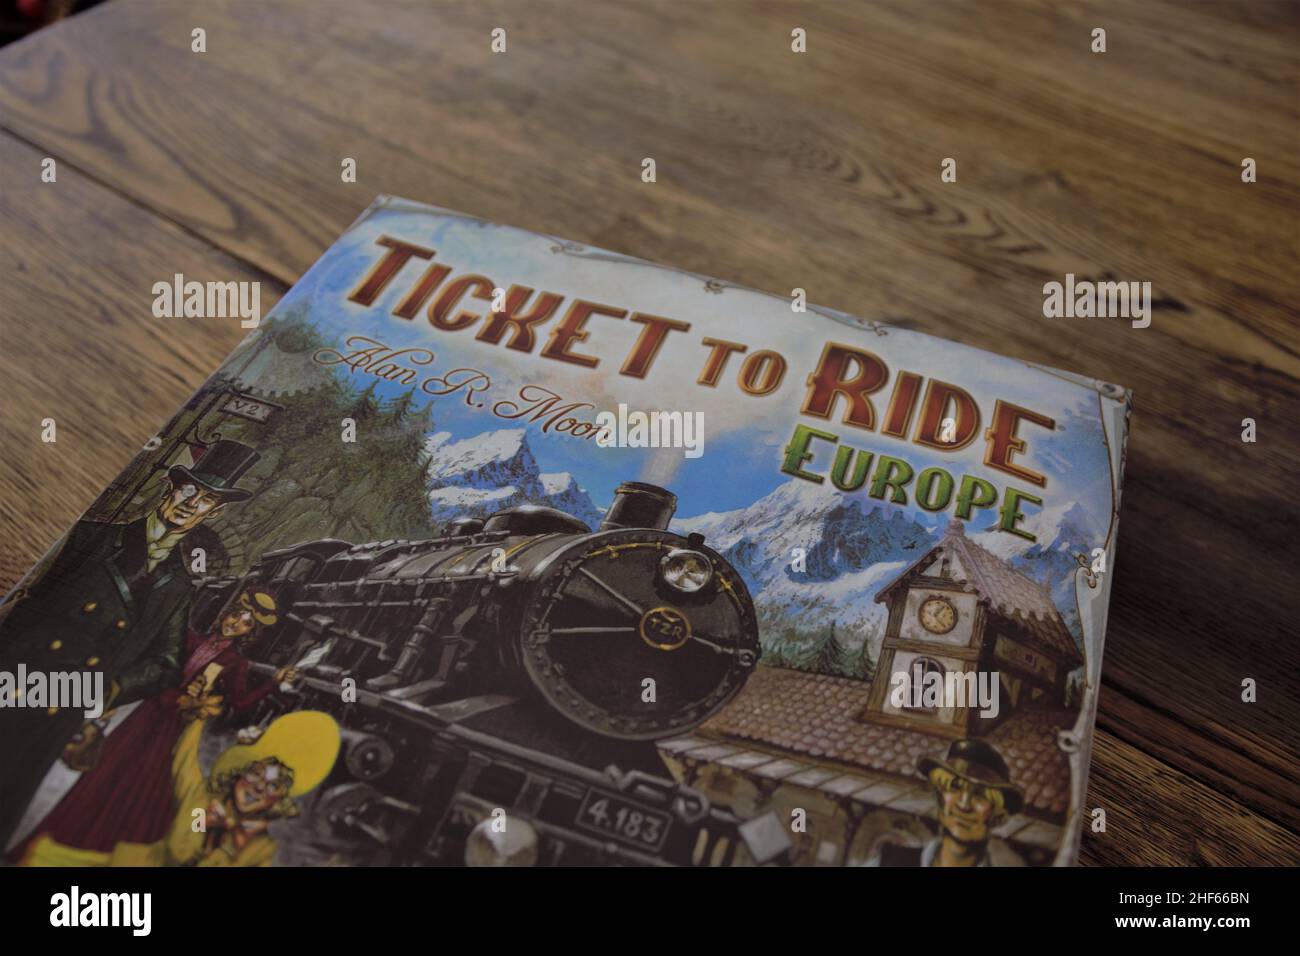 Ticket To Ride Europe. A railway-themed board game whereby plays build routes to connect cities. The family fun game has won multiple awards. Stock Photo